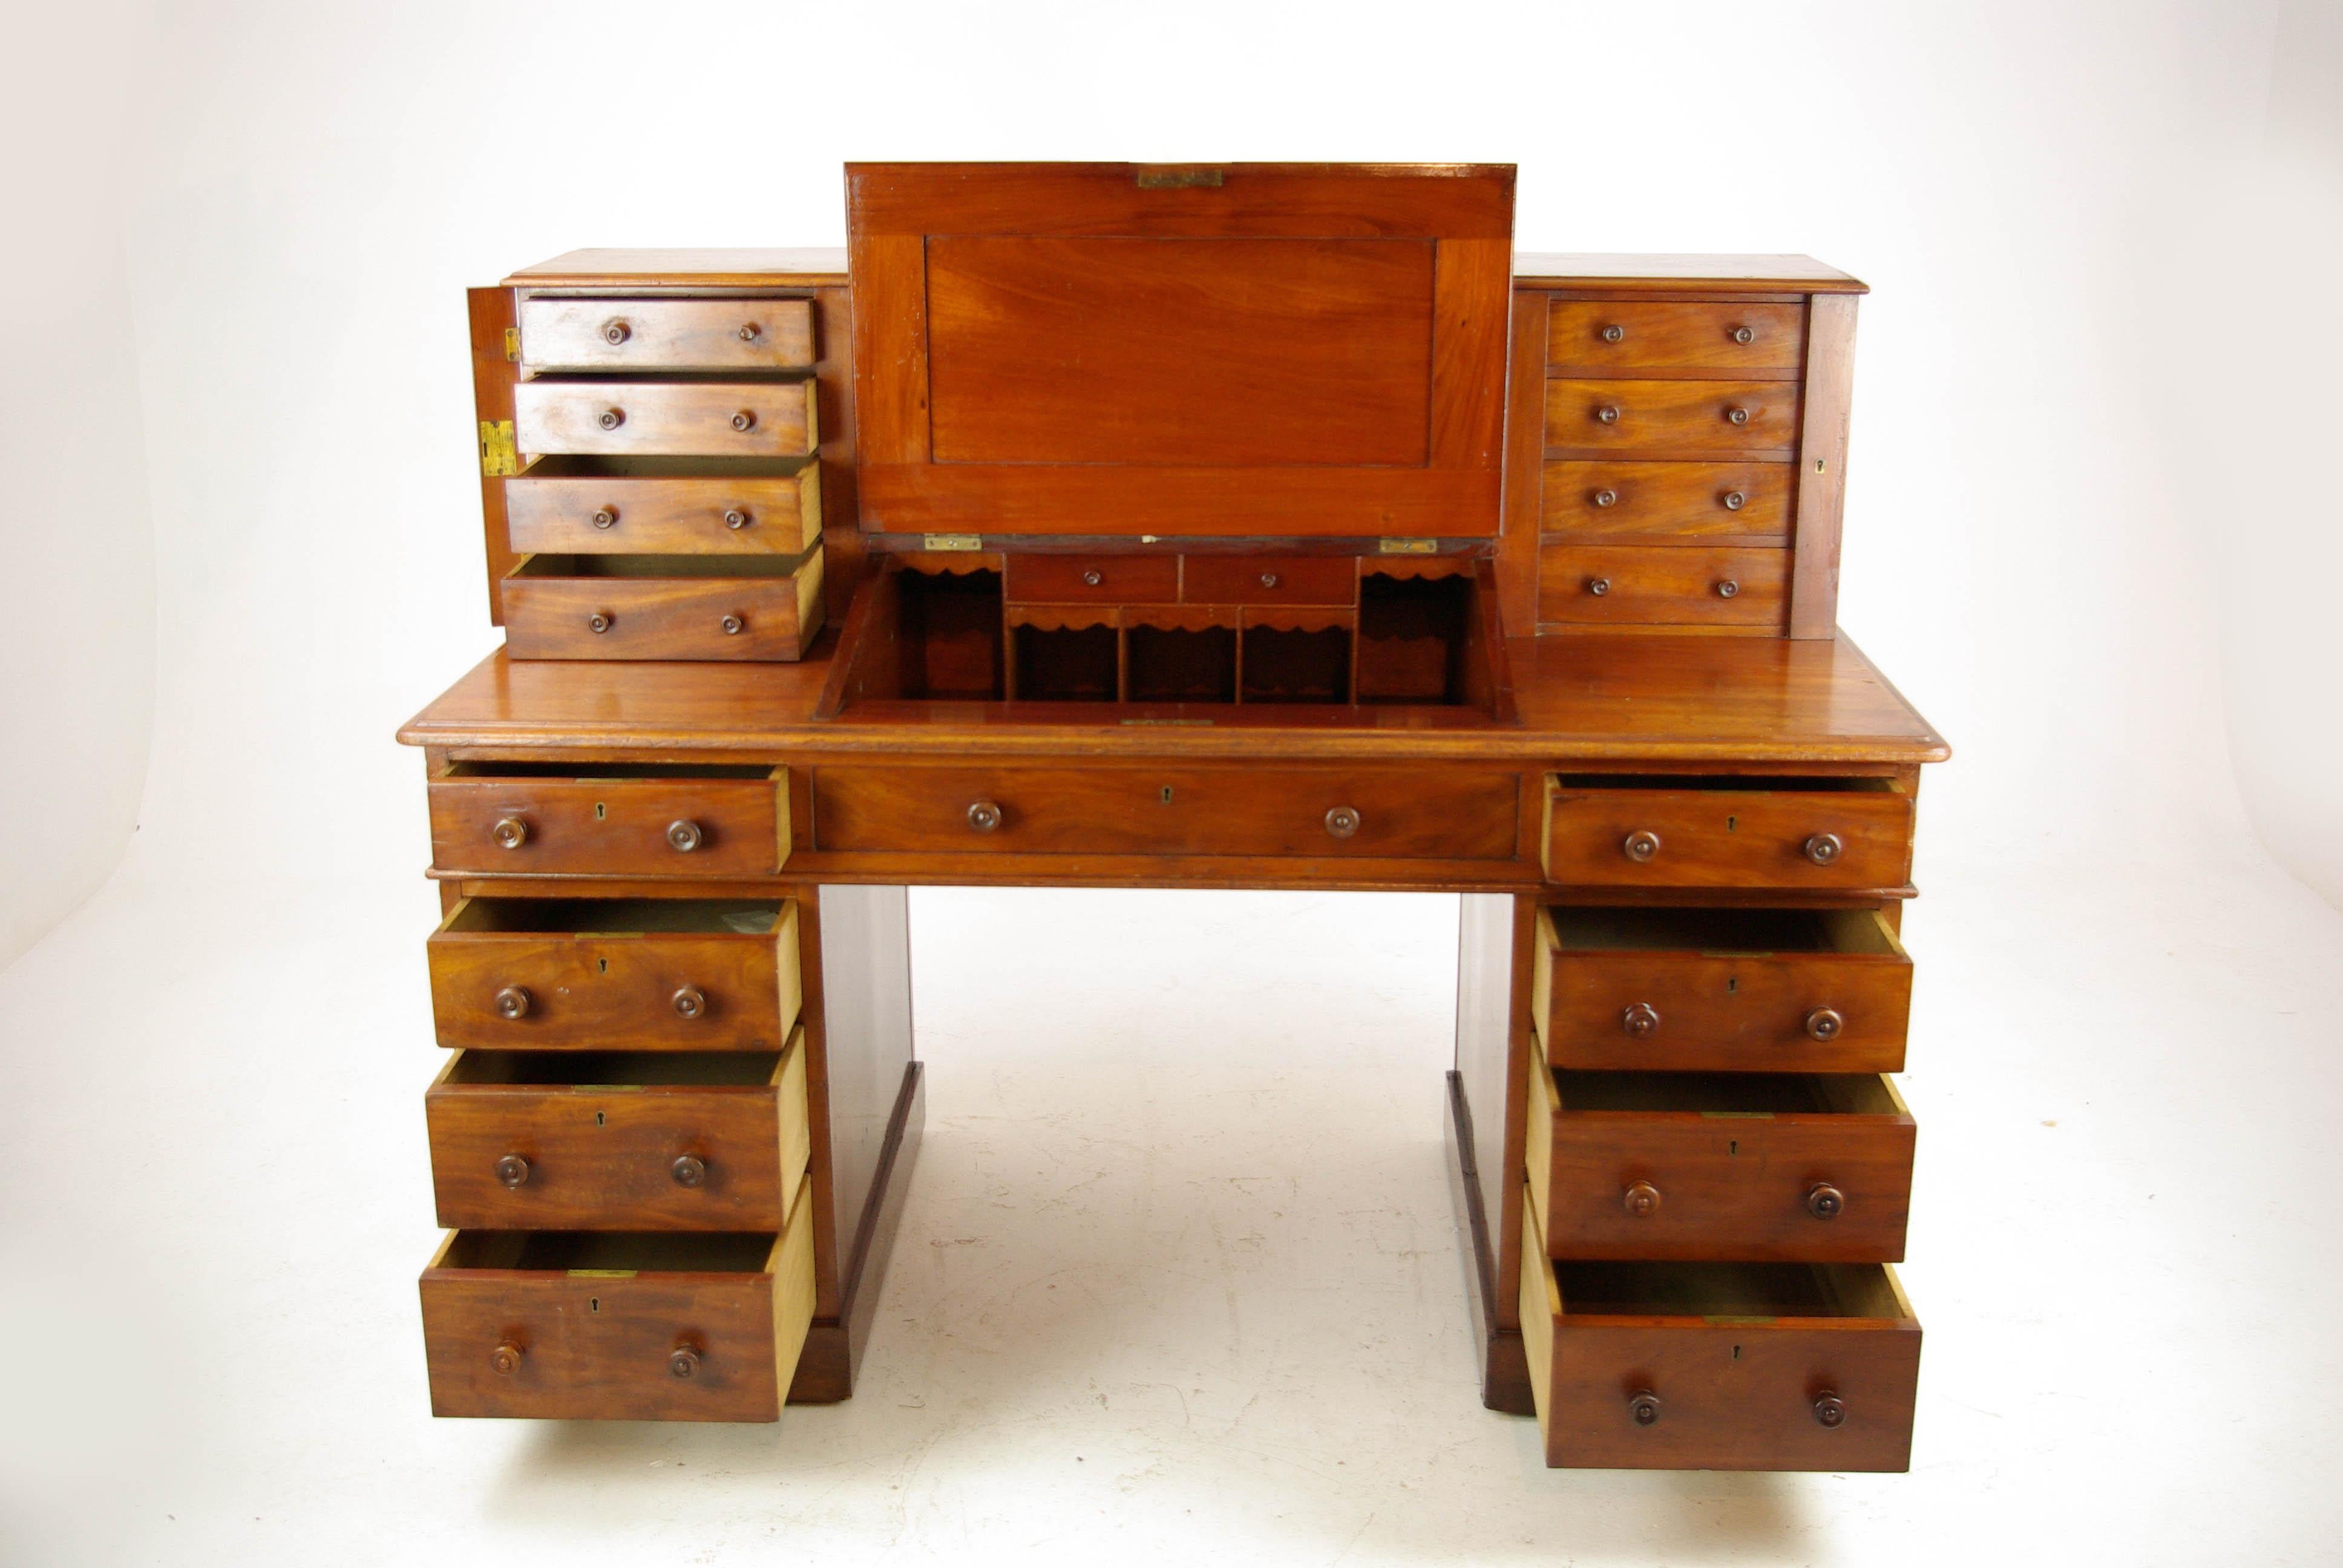 Dickens desk, antique walnut desk, slant front desk, England 1880, antique furniture, B1241

England 1875
Solid walnut
Original finish
Topped with central spindled gallery
Flanked by two flights of four small drawers
Secured with locking bars
Center